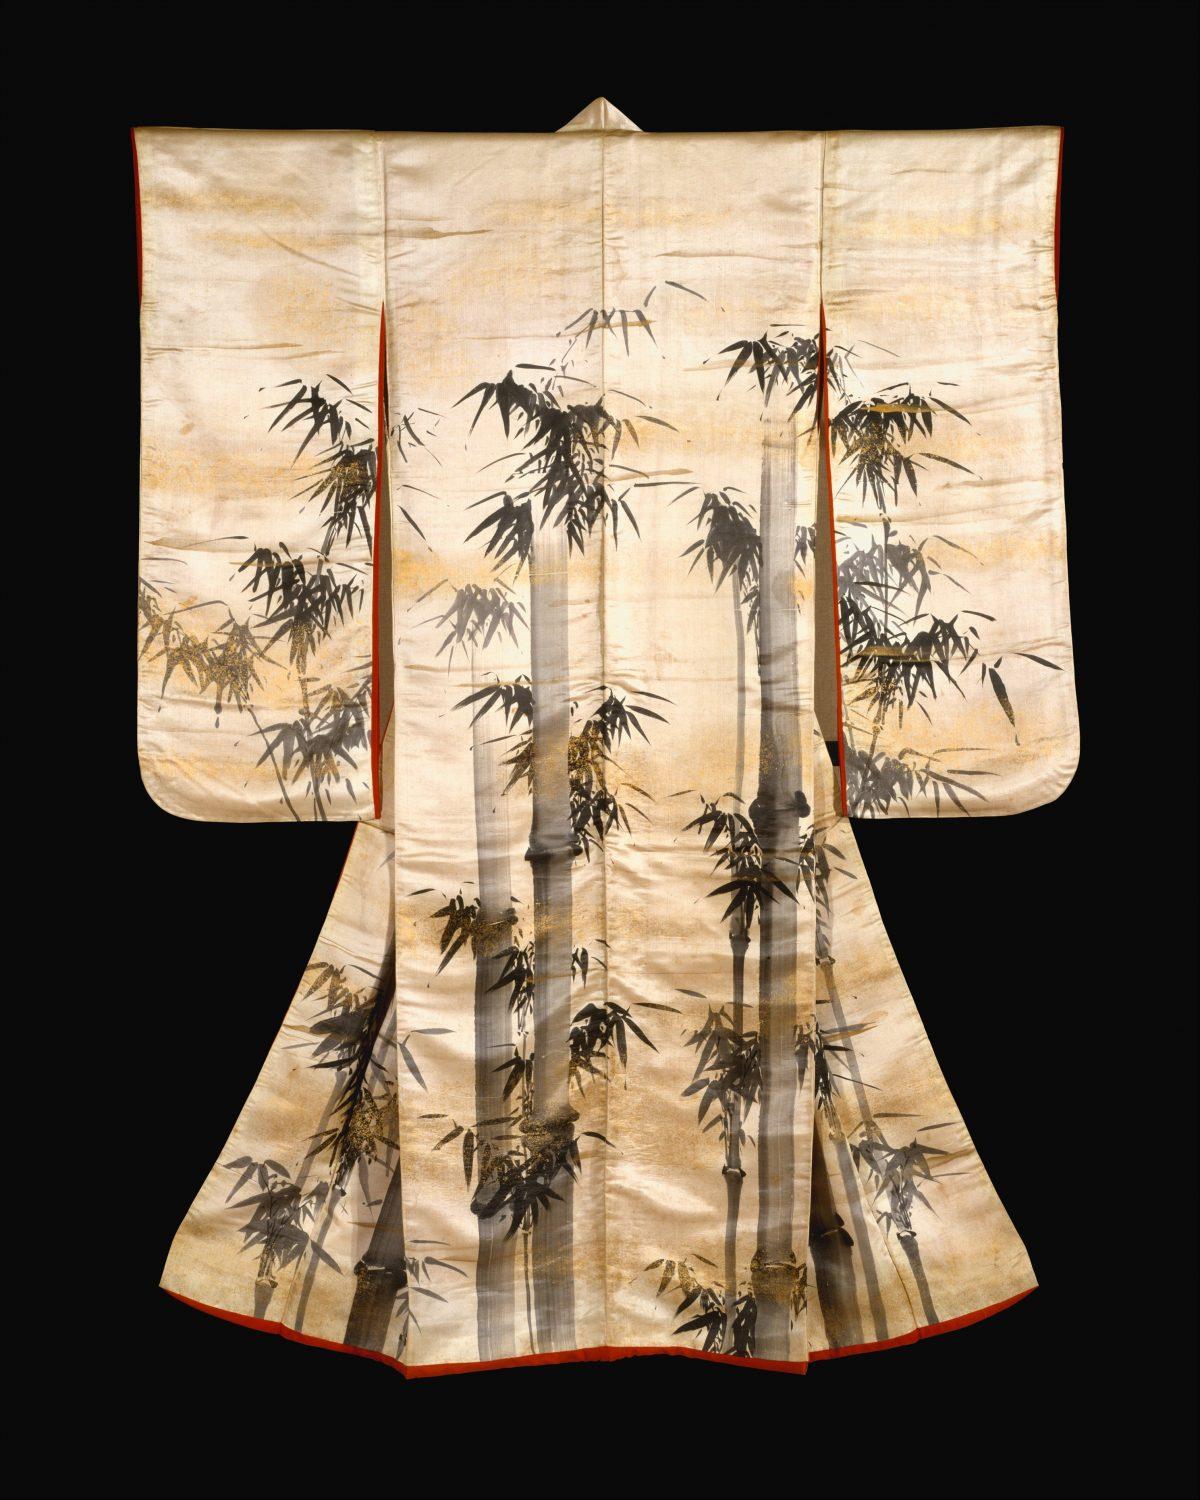 Overrobe (Uchikake) with bamboo, Edo period (1615–1868), first half of the 18th century. This rare uchikake is the work of Gion Nankai, a well-known poet and artist of the early Nanga movement. The Harry G. C. Packard Collection of Asian Art, gift of Harry G. C. Packard, and Purchase, Fletcher, Rogers, Harris Brisbane Dick, and Louis V. Bell Funds, Joseph Pulitzer Bequest, and The Annenberg Fund Inc. Gift, 1975. (The Metropolitan Museum of Art)